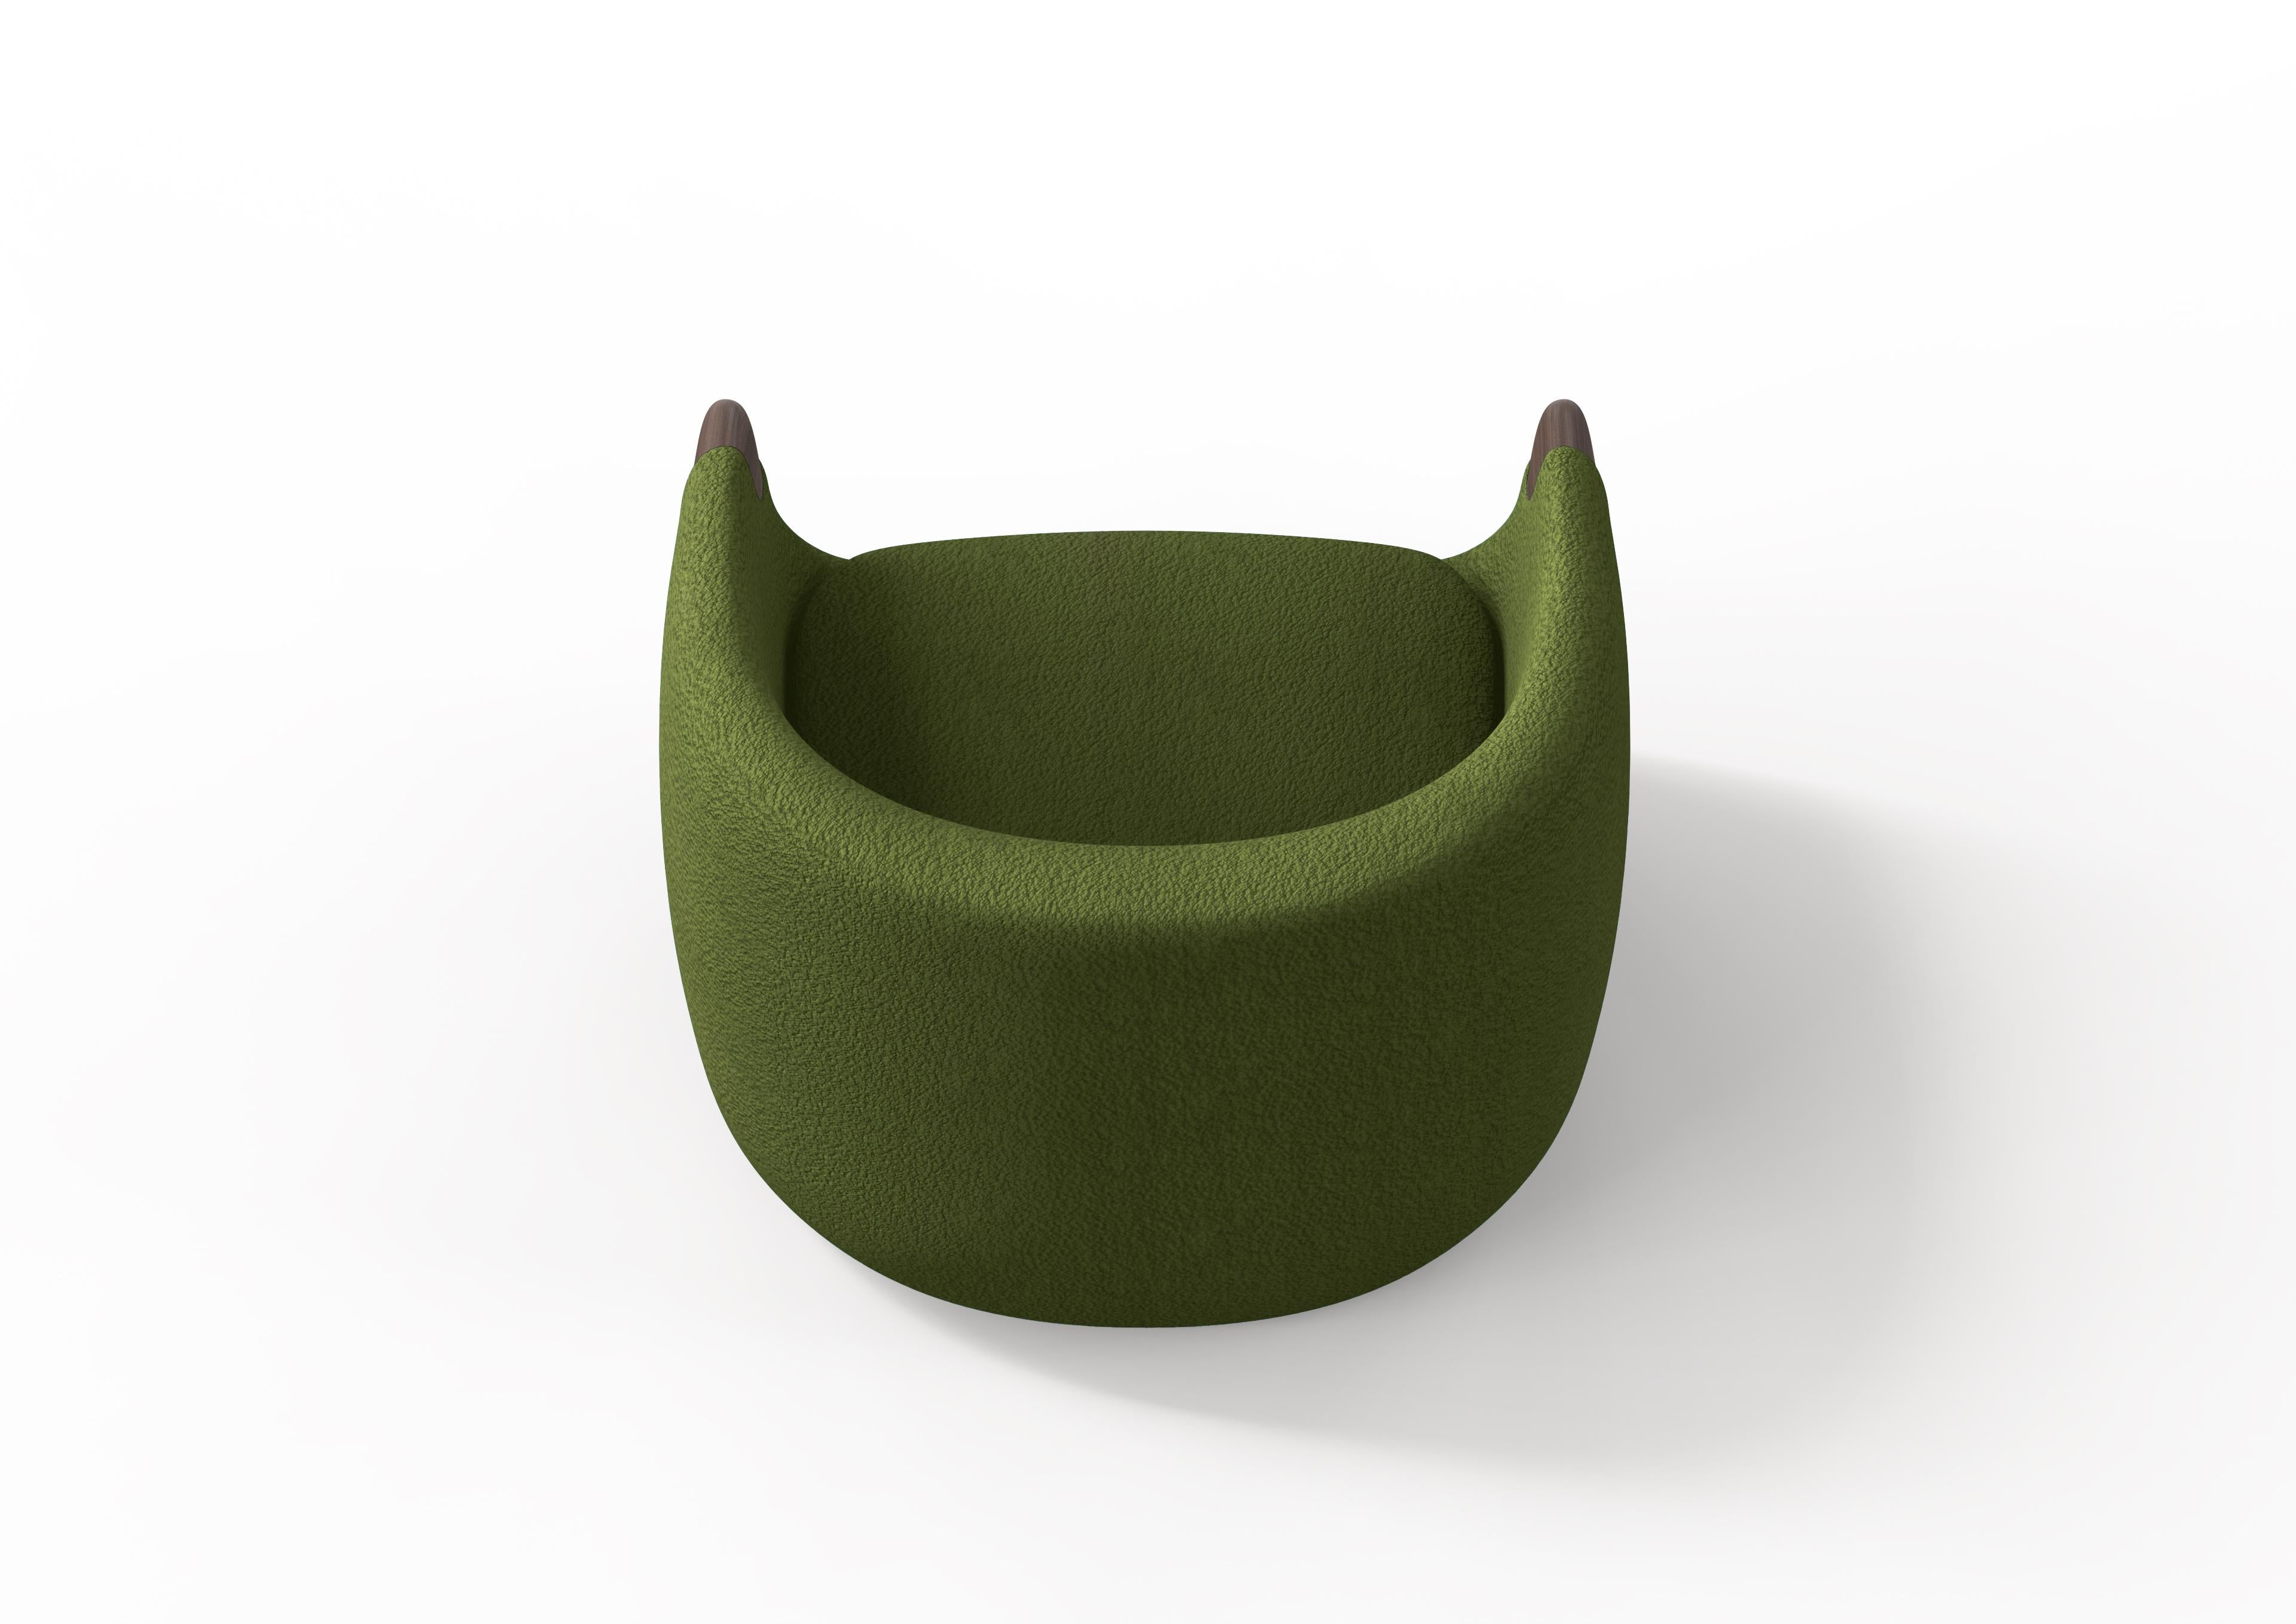 Bubble is a playful element. Its soft and organic shape is emphasized by the seat cushion embedded inside the shell. The cockpit shape aims to communicate great comfort, while its most characterizing detail, the solid wood handles that protrude from